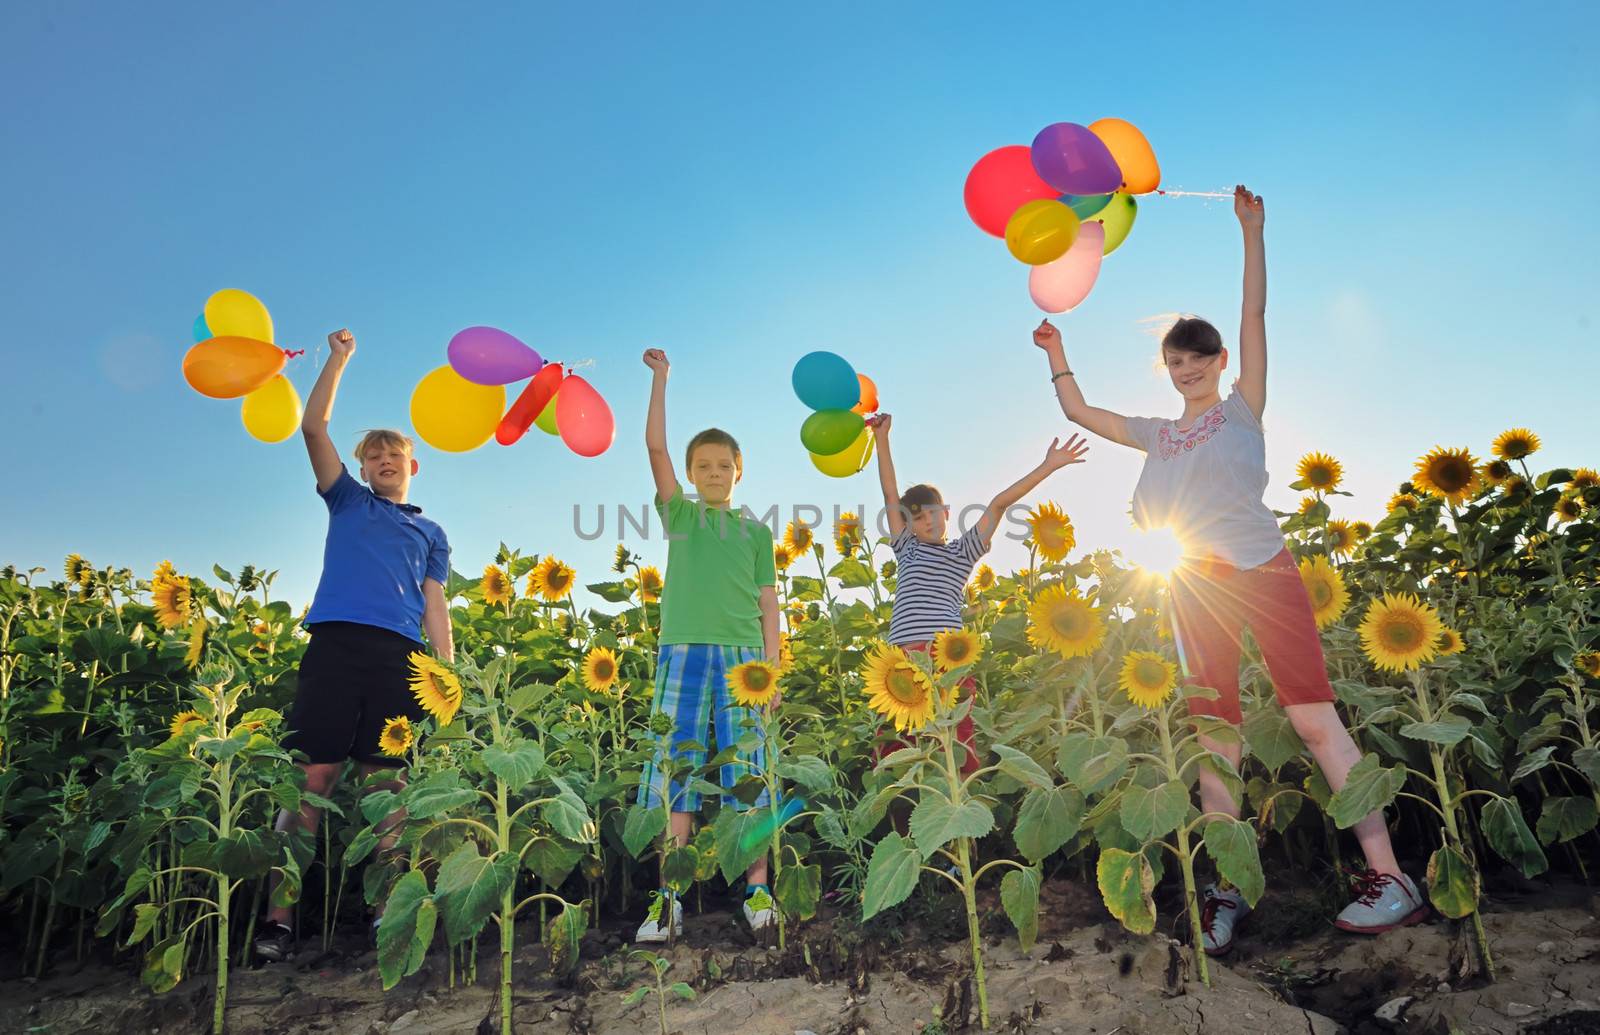 happy children with colorful balloons jumping  in a field of sunflowers 